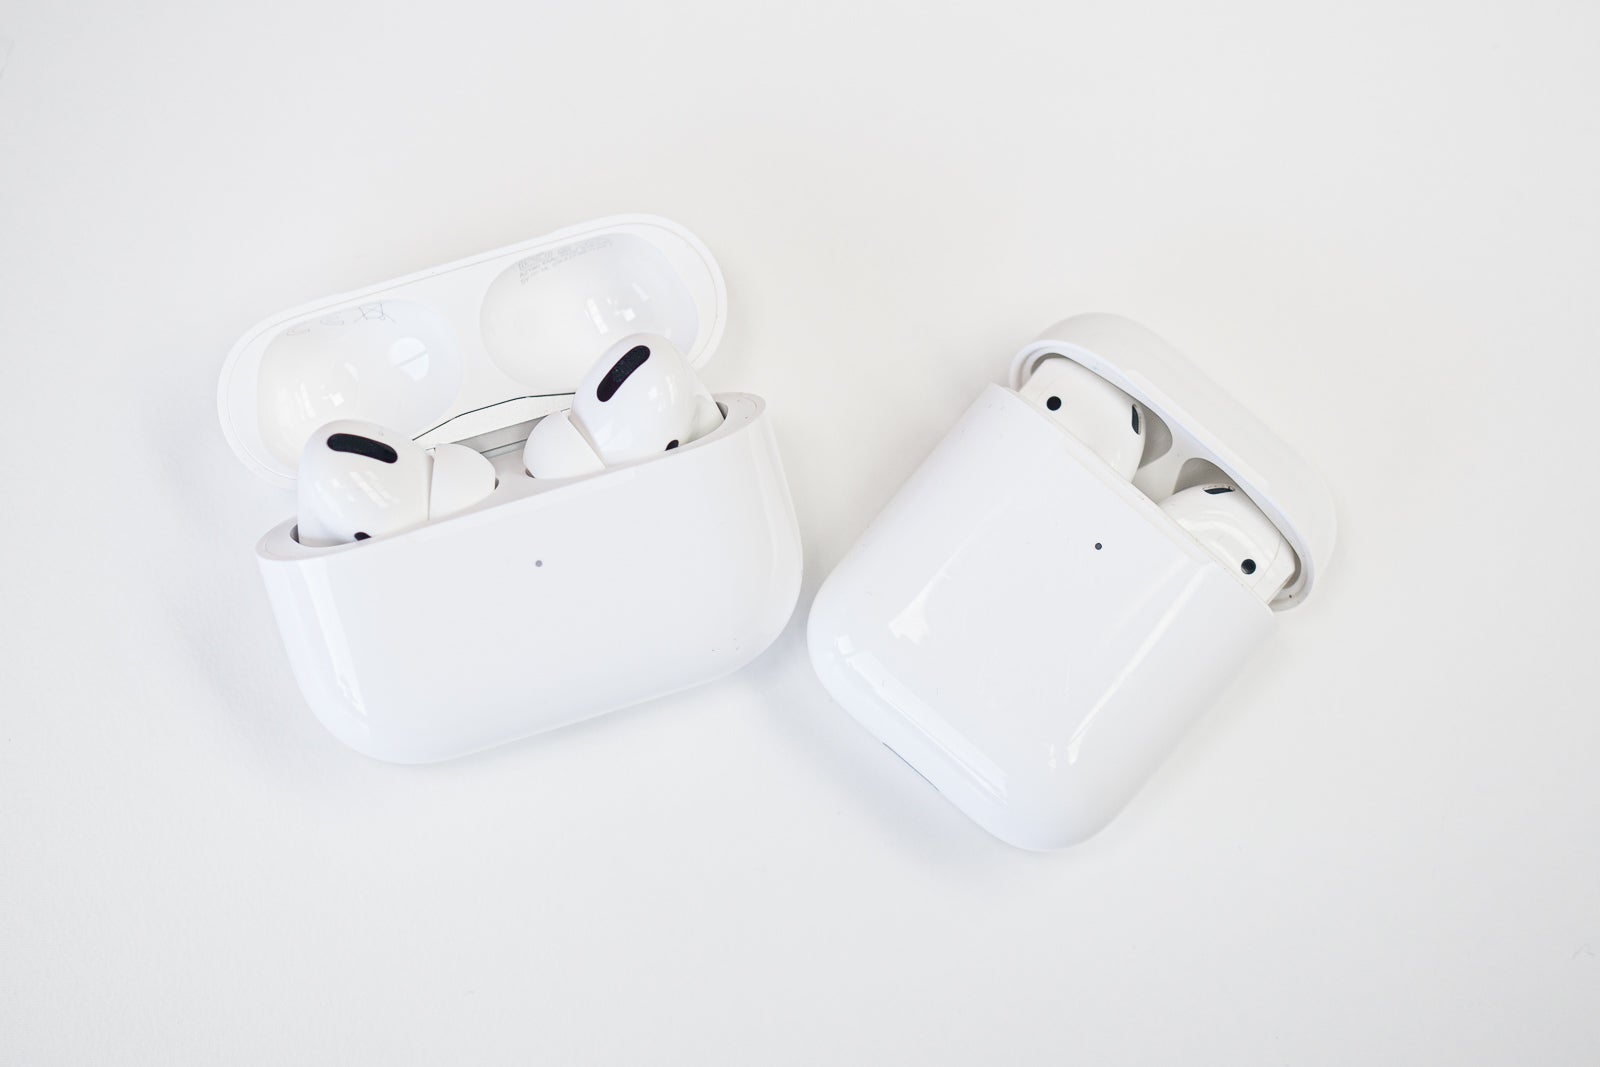 Both the AirPods Pro and the 2nd Gen AirPods are great pairs of earbuds - Amazon currently has the AirPods Pro and AirPods 2 at a huge discount.